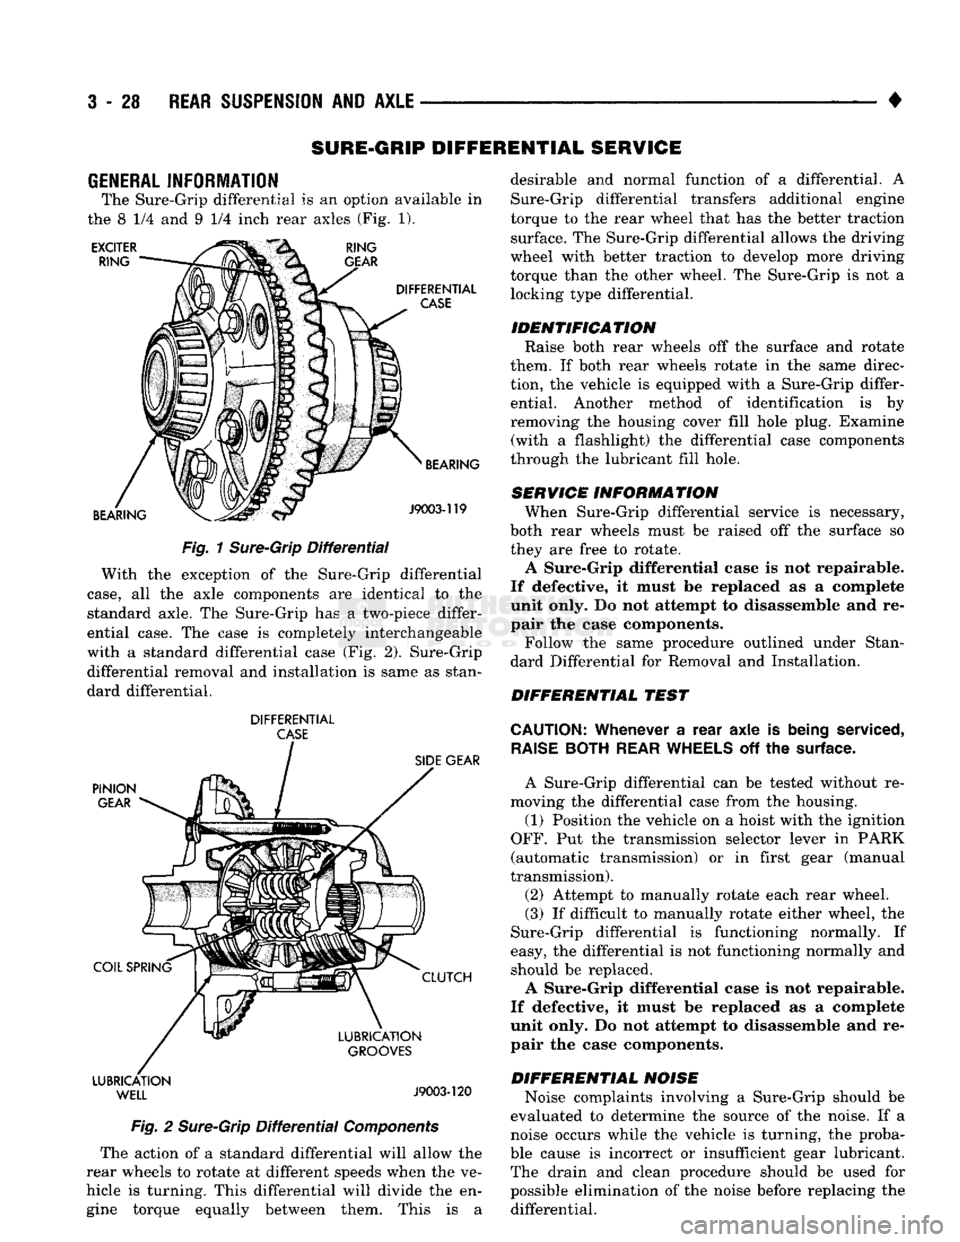 DODGE TRUCK 1993  Service Repair Manual 
3
 - 28
 REAR
 SUSPENSION
 AND
 AXLE 

• 
SURE-GRIP
 DIFFERENTIAL
 SERVICE 

GENERAL
 INFORMATION 
 The Sure-Grip differential
 is an
 option available
 in 

the
 8 1/4 and 9 1/4
 inch rear axles
 